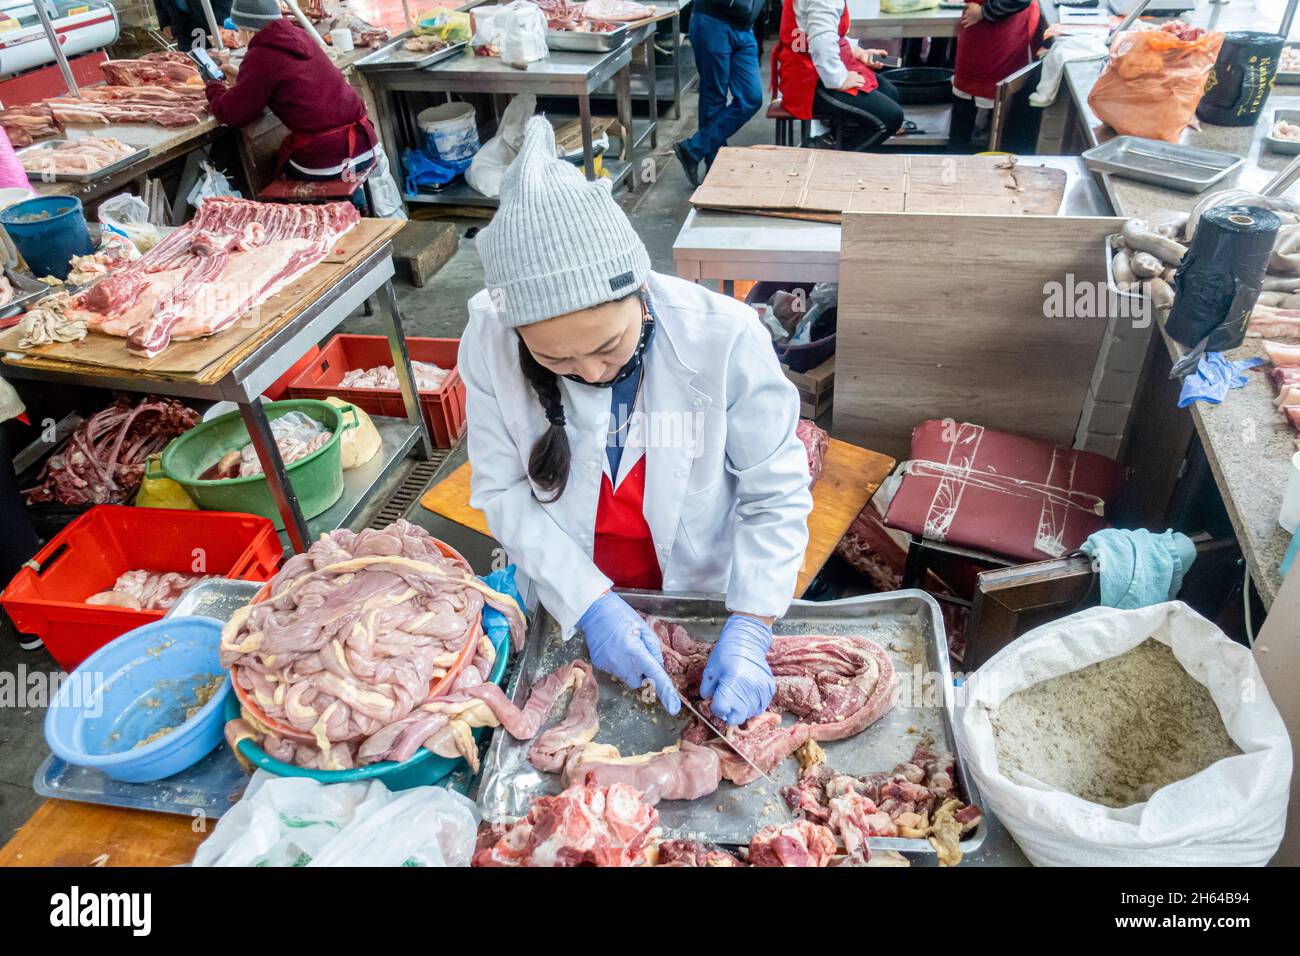 A kazakh woman is cutting horse meat to prepare qazy, horse sausage in the meat market Altyn Orda, Almaty, Kazakhstan Stock Photo